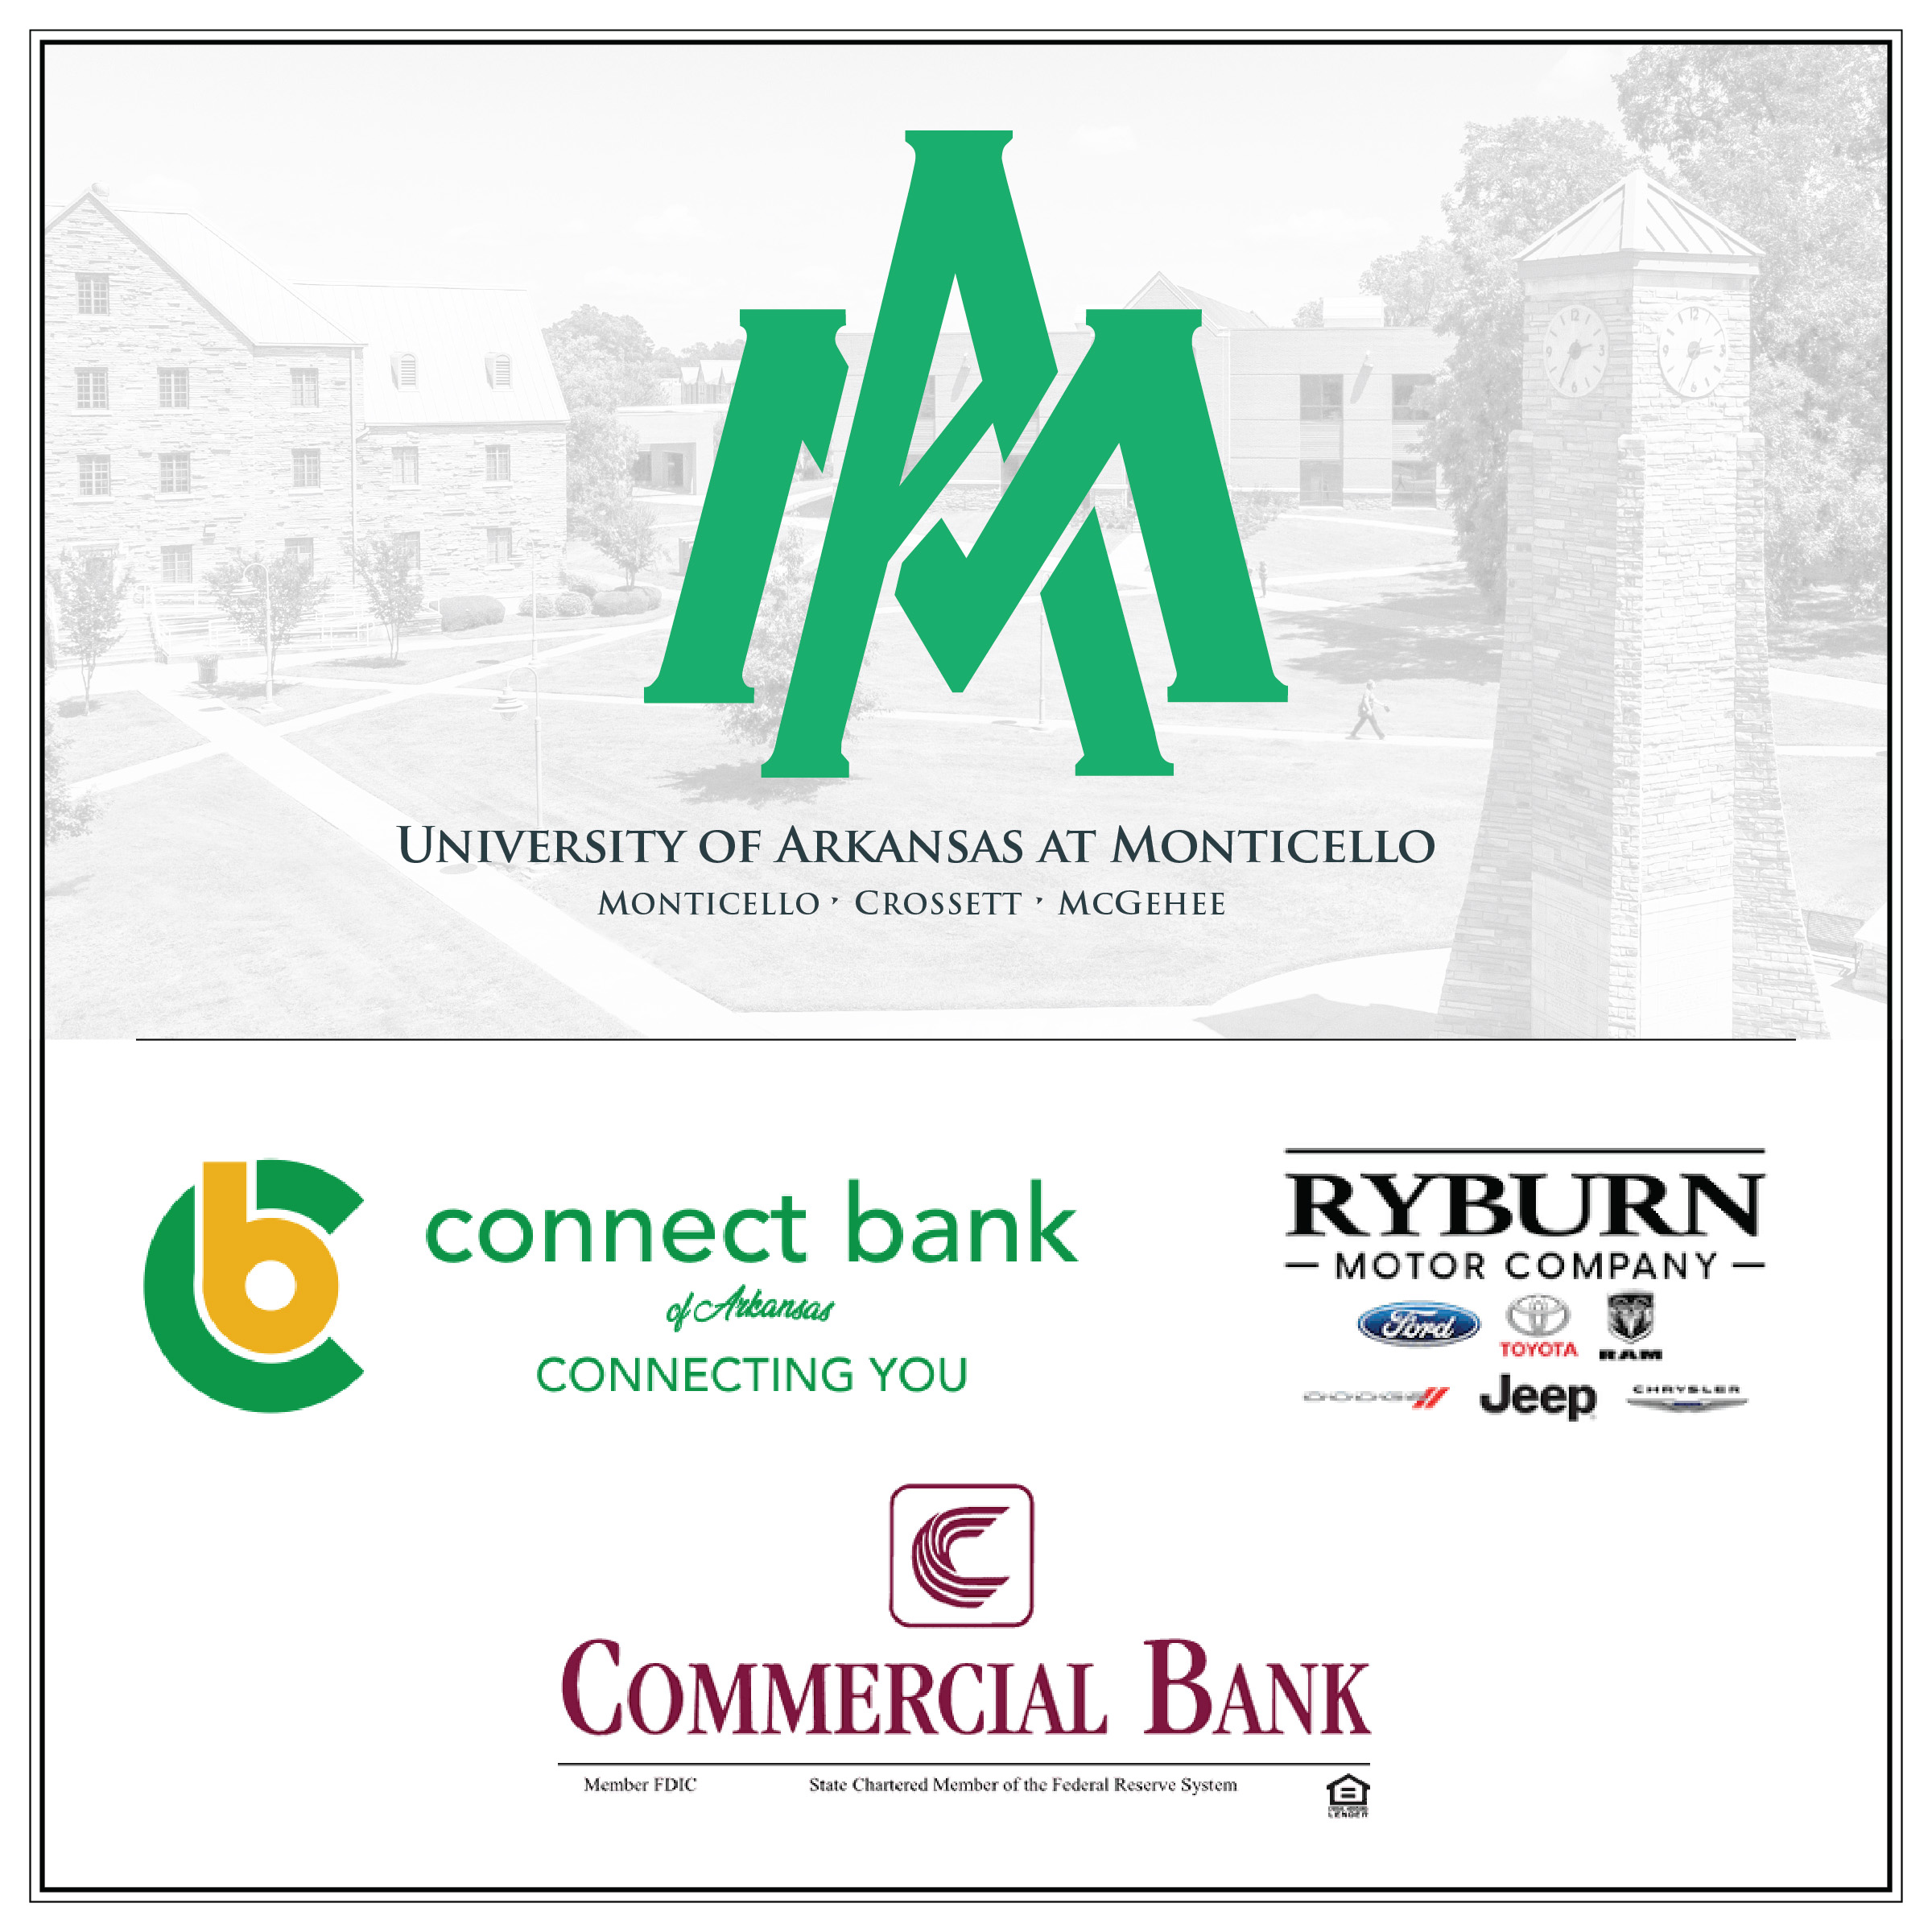 Ryburn Gifts to UAM Fund and Athletics